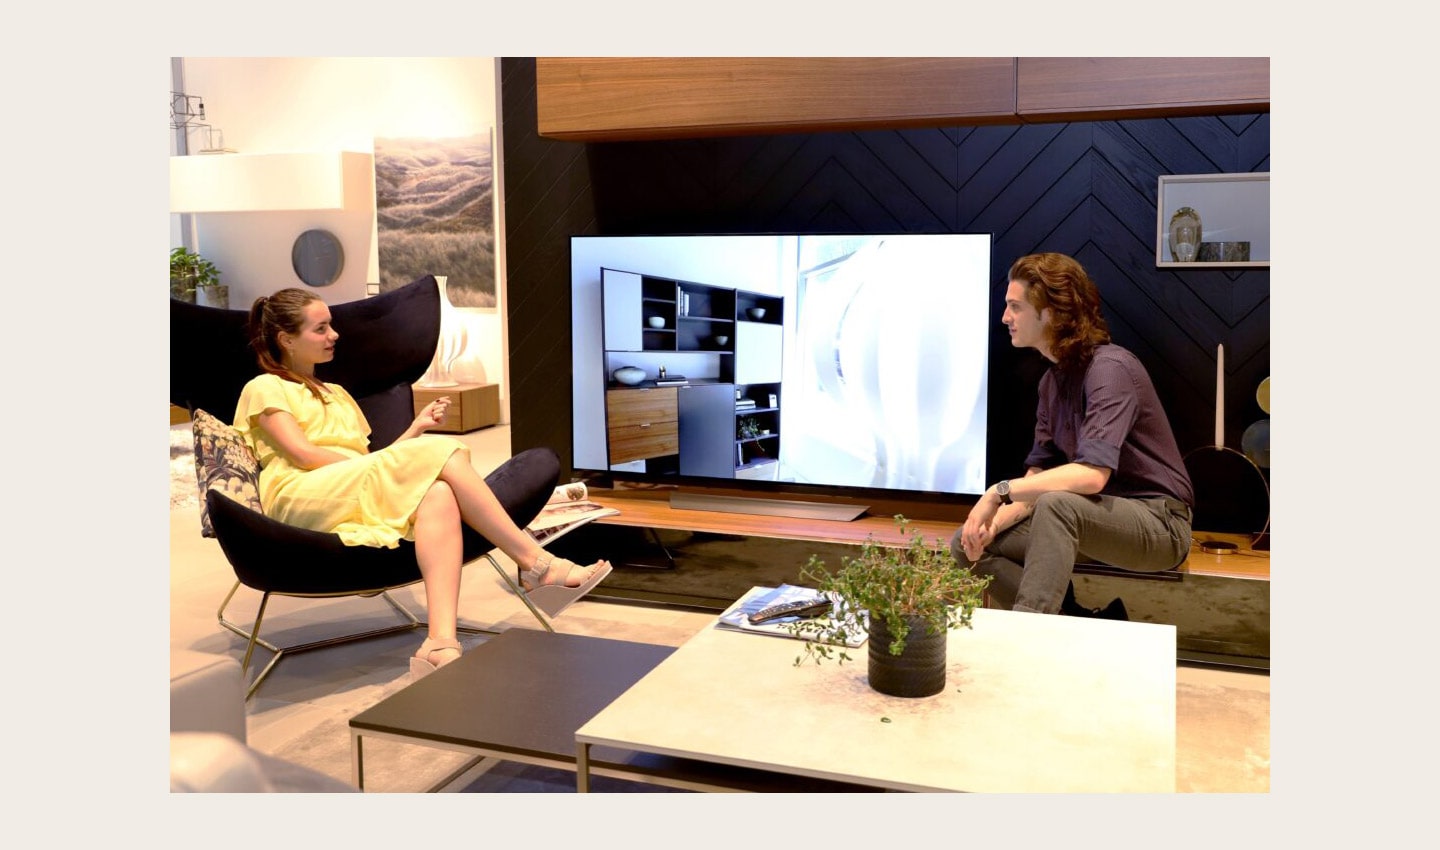 A man and a woman sit in the sample AI-enabled living room discussing LG's AI ThinQ-enabled TVs